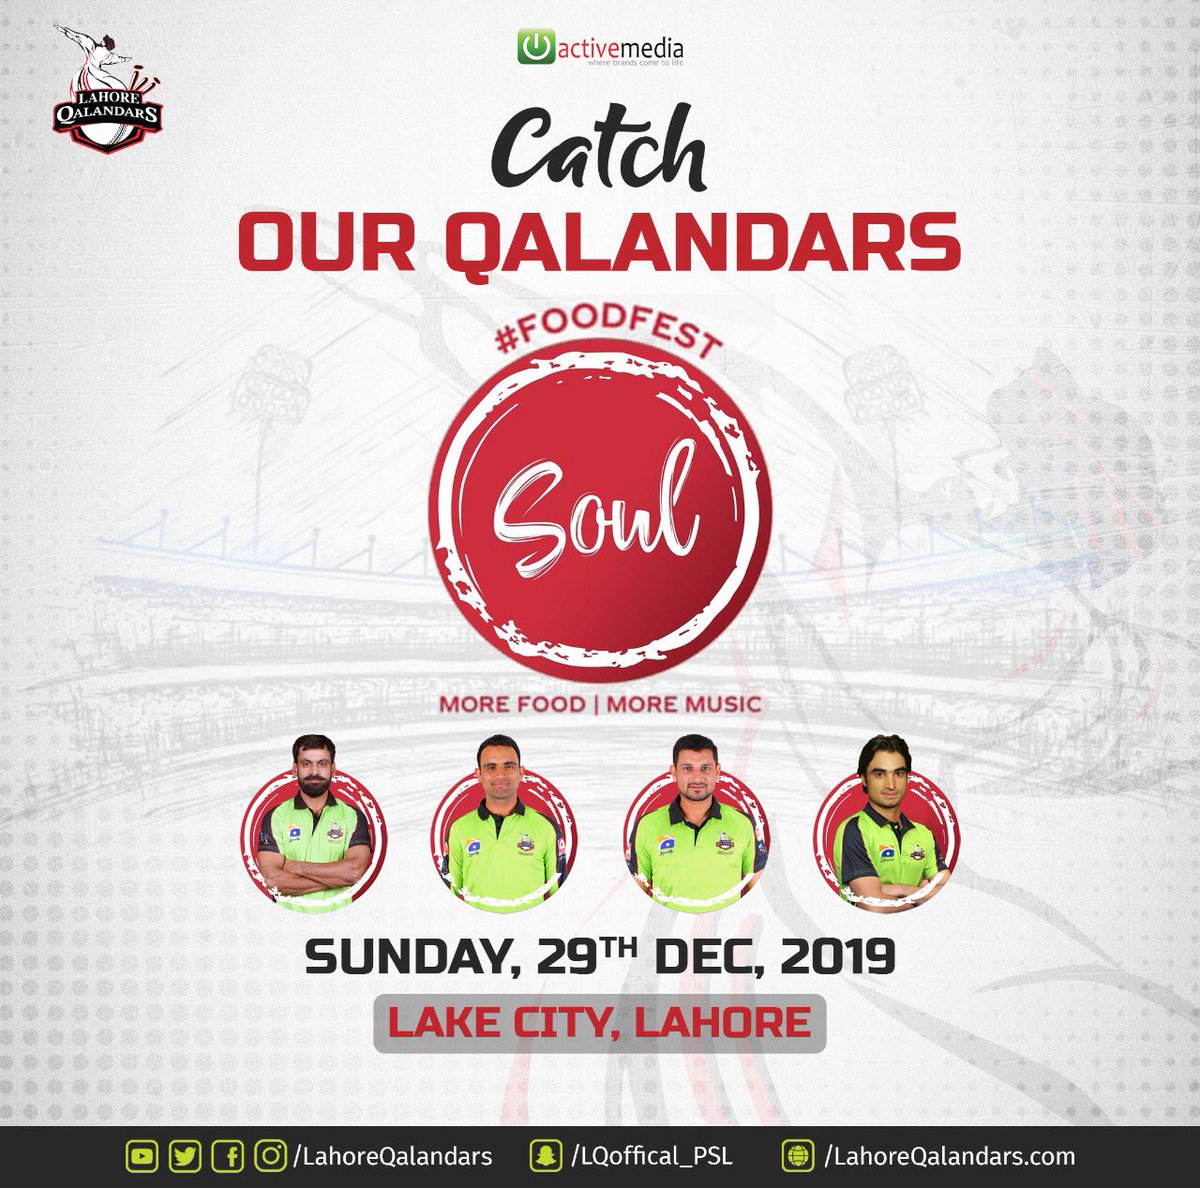 Food🥘, Music🎵& Cricket🏏! What more can you ask for? 🤔
Catch Lahore Qalandars Team & Management at Soul Festival on Sunday, December 29th 2019!
Meet & greet with our Qalandars & a chance to win exciting prizes! 🎁 
⁣
#DamaDamMast #MainHoonQalandar #SoulFest #SoulFestival